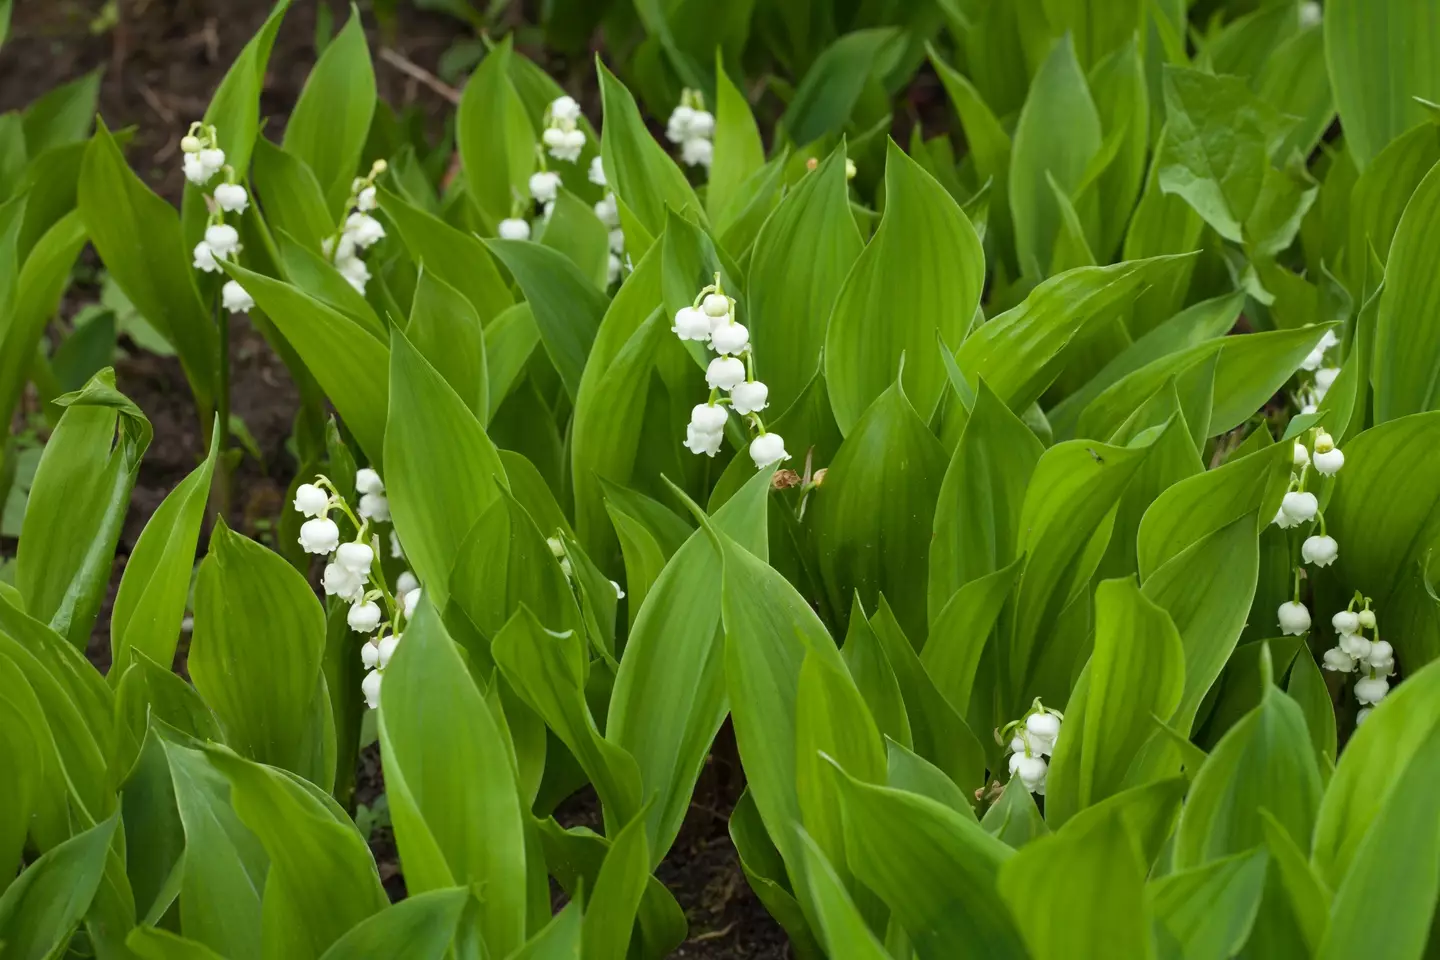 The lily of the valley may look beautiful but every part of the plant from flower to leaves is poisonous.